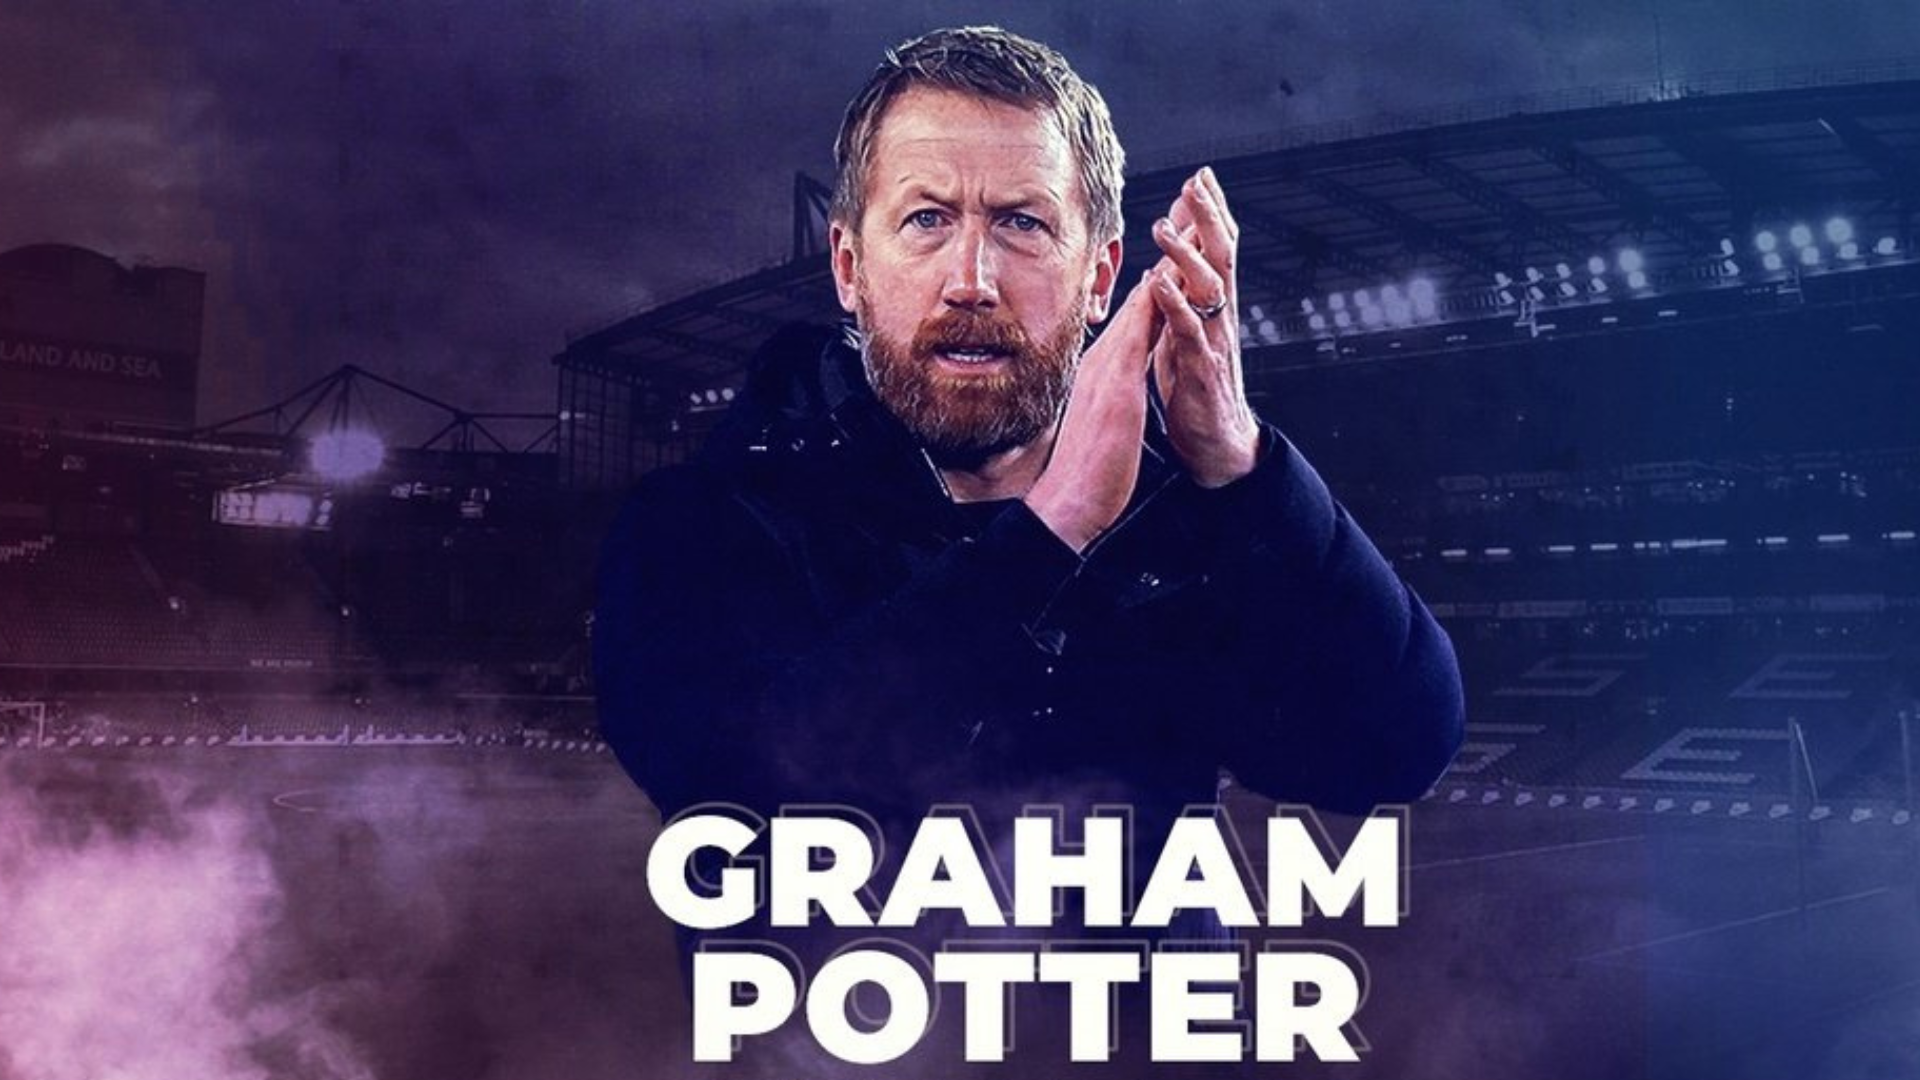 Graham Potter clapping his hands while in the football fields with his name at the bottom